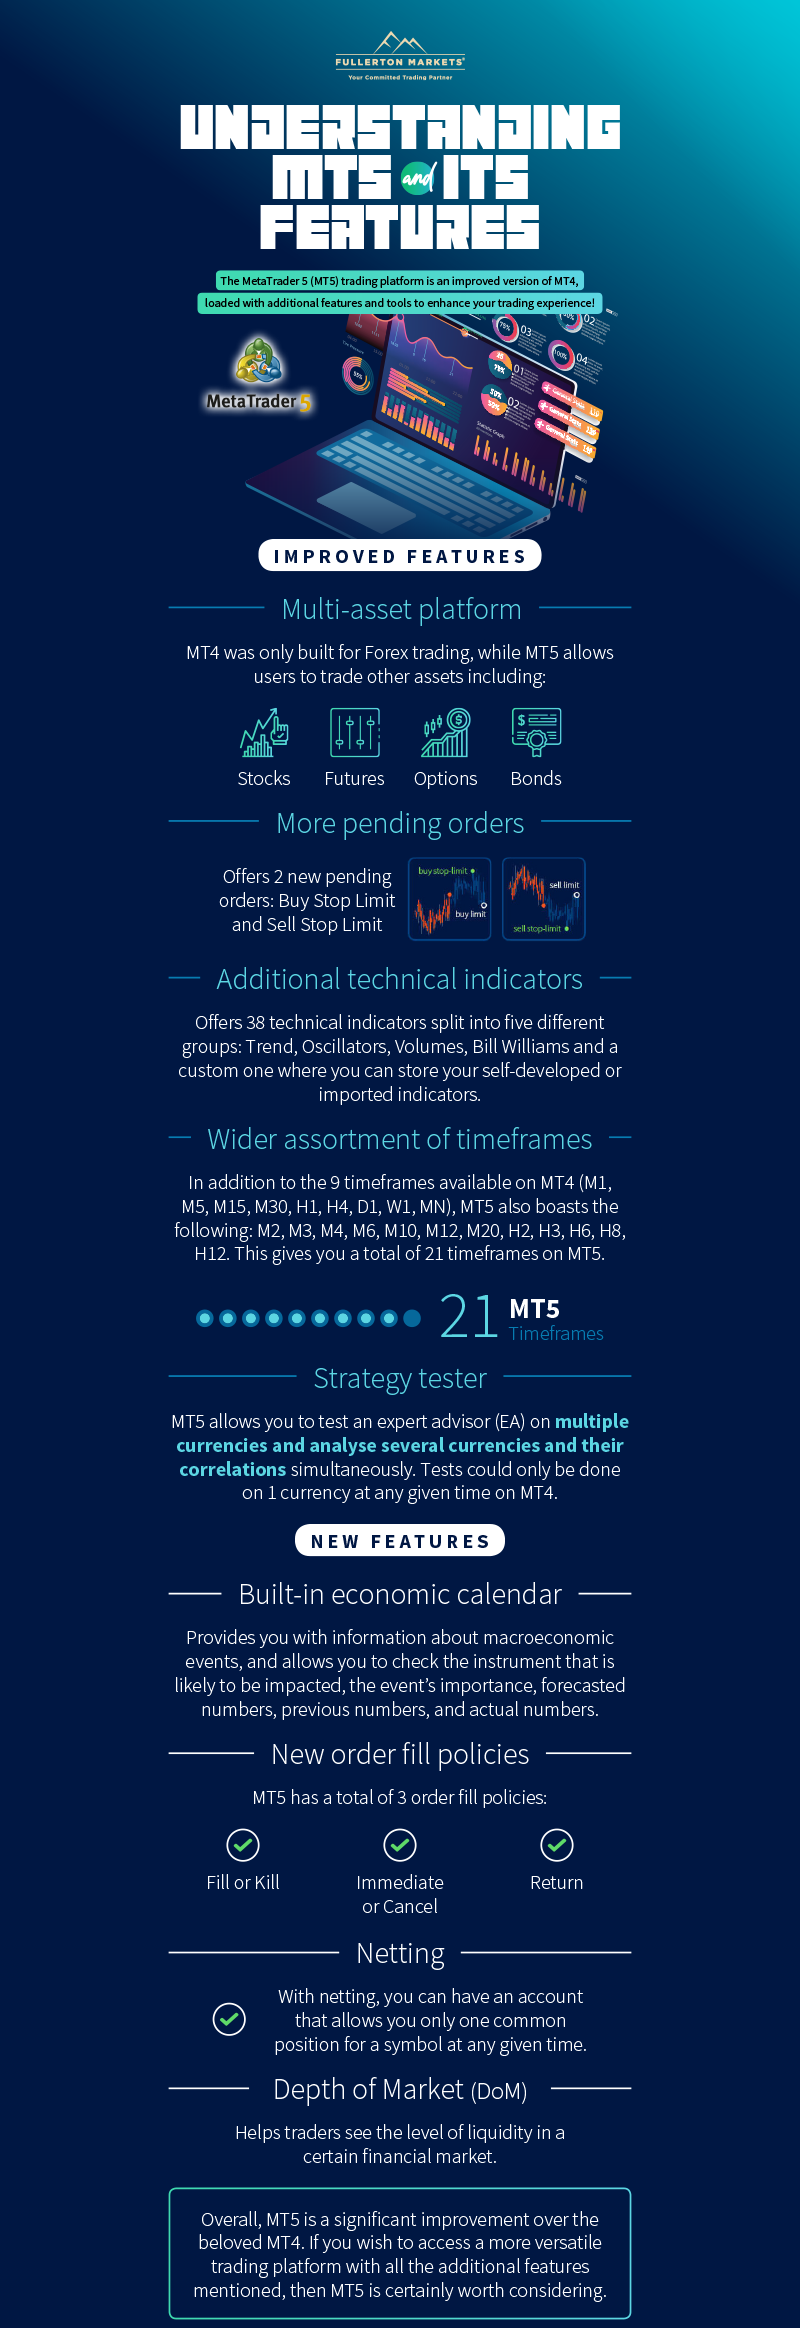 Infographic on MT5 and its features